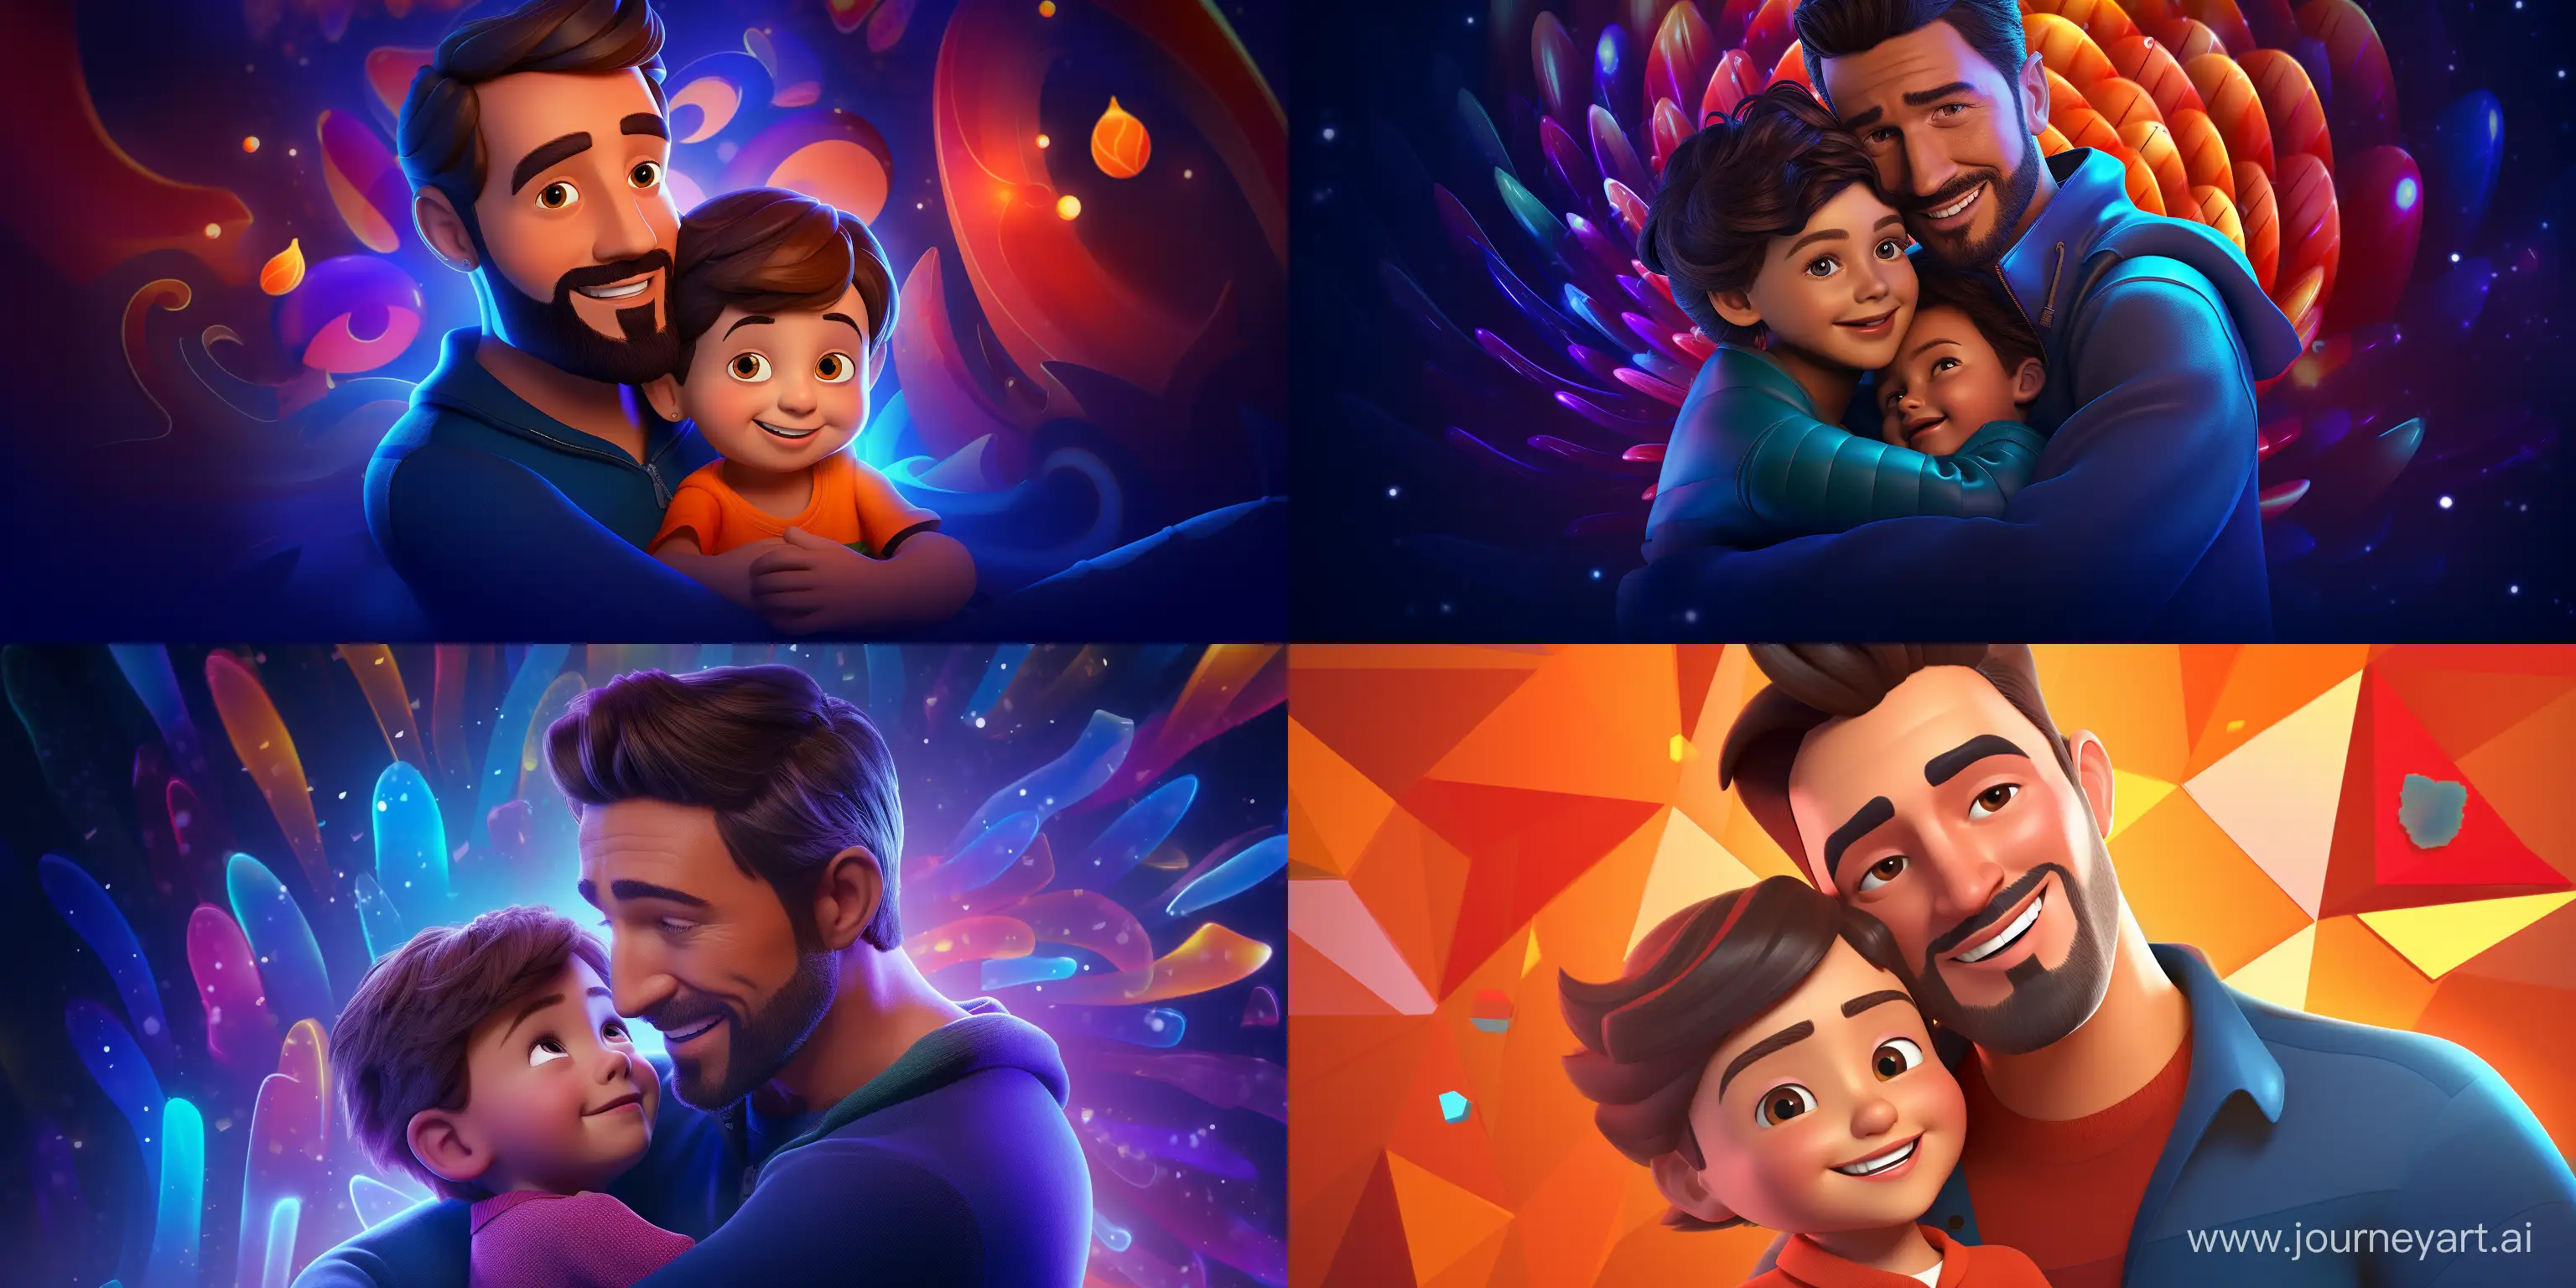 Affectionate-Disney-Studio-Style-3D-Cartoon-Father-and-Kid-Embraced-in-Festive-Joy